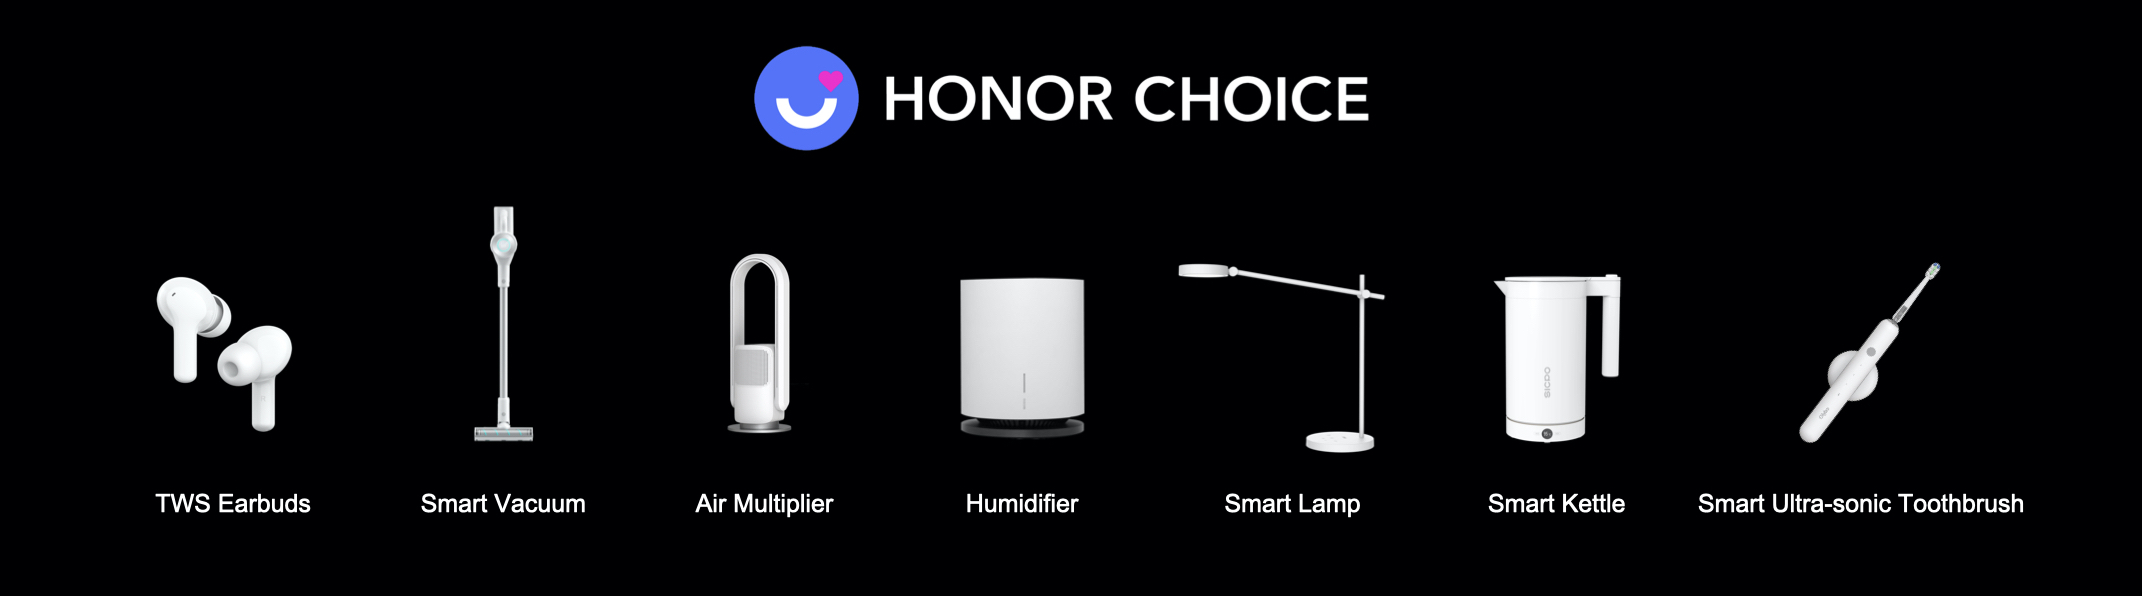 Honor choice earbuds x5 pro обзоры. Honor choice Earbuds x размер. Honor choice Earbuds x управление. Honor choice Earbuds x3. Honor choice Earbuds x насадки.